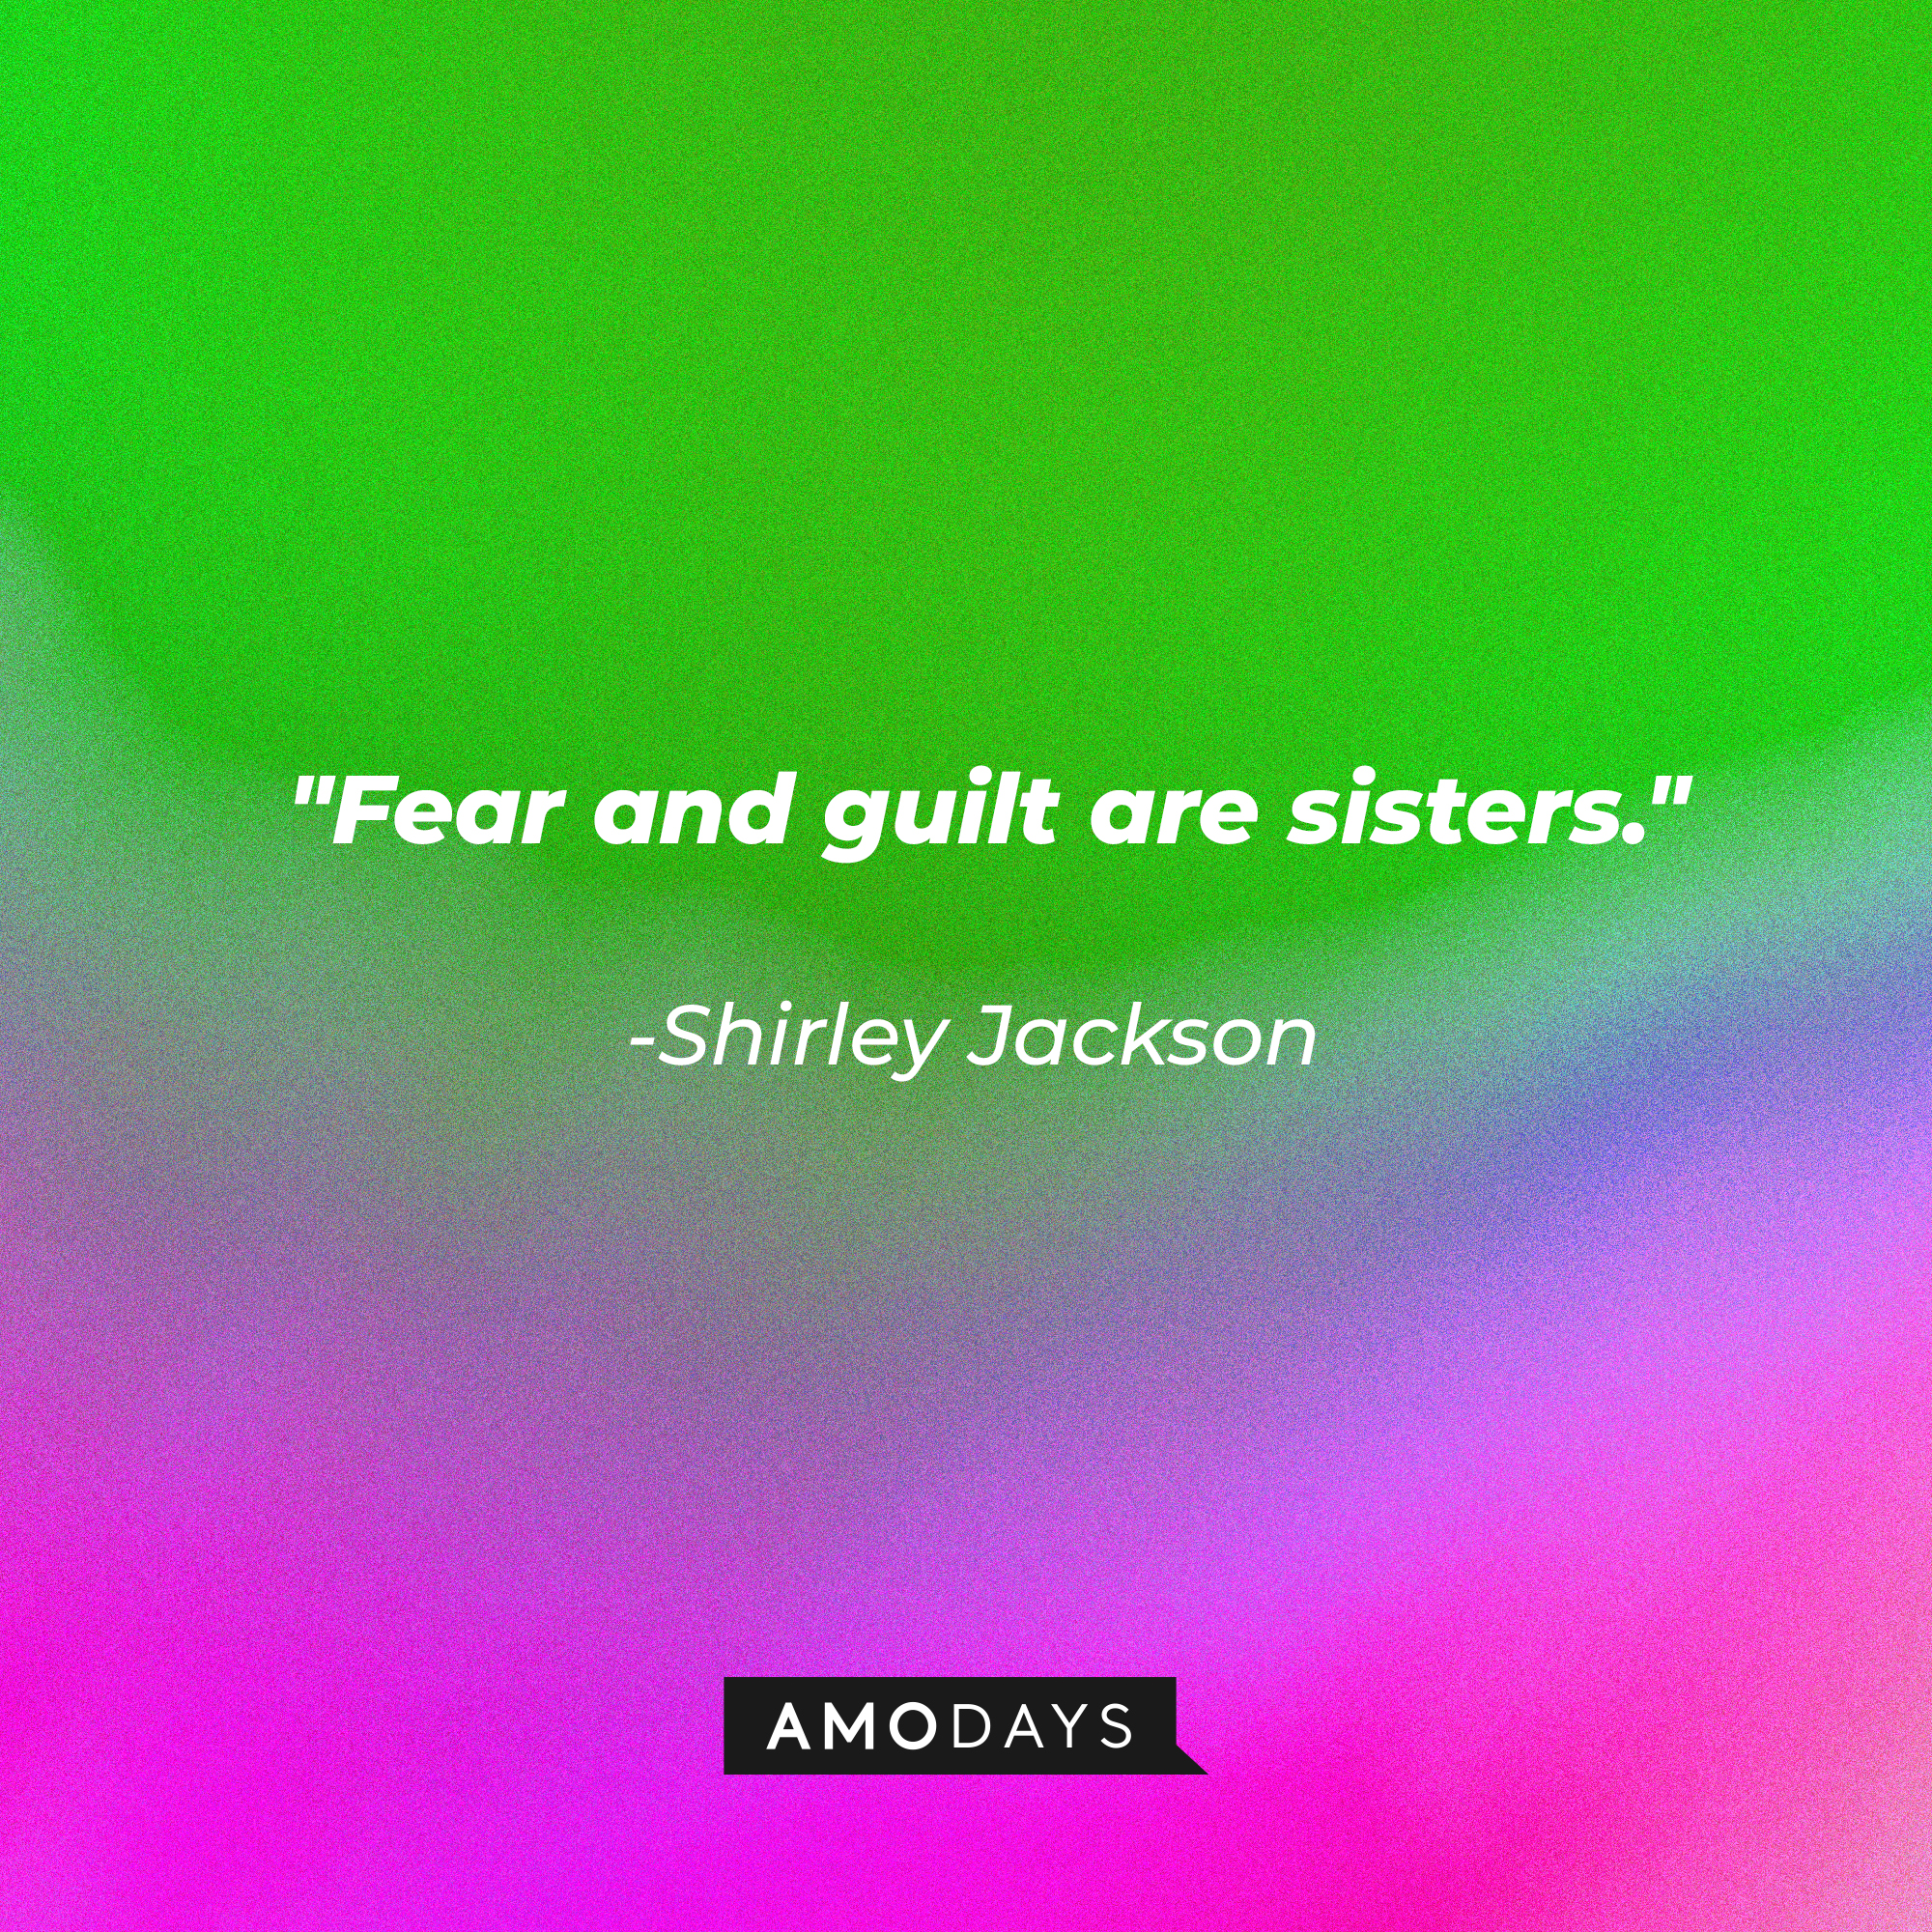 Shirley Jackson's quote: "Fear and guilt are sisters." | Image: AmoDays